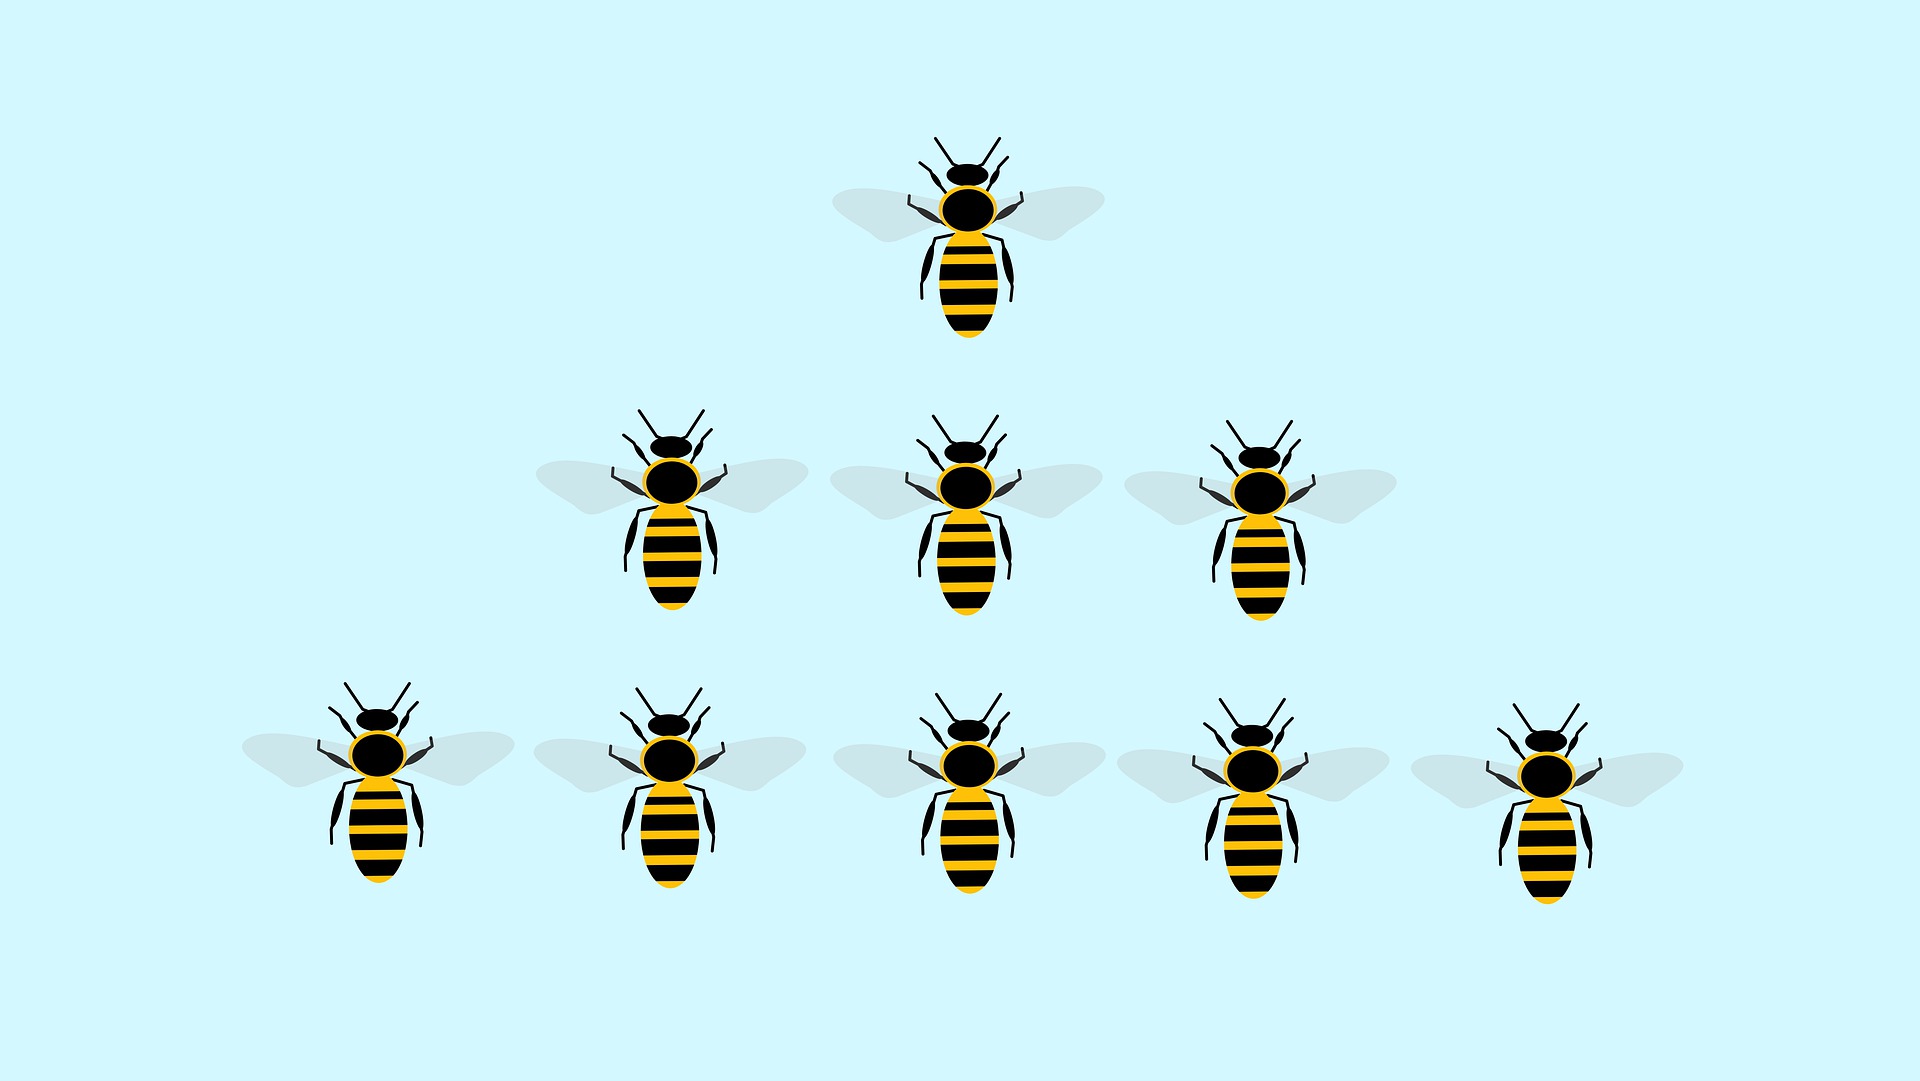 Nine bees arranged in a triangle formation